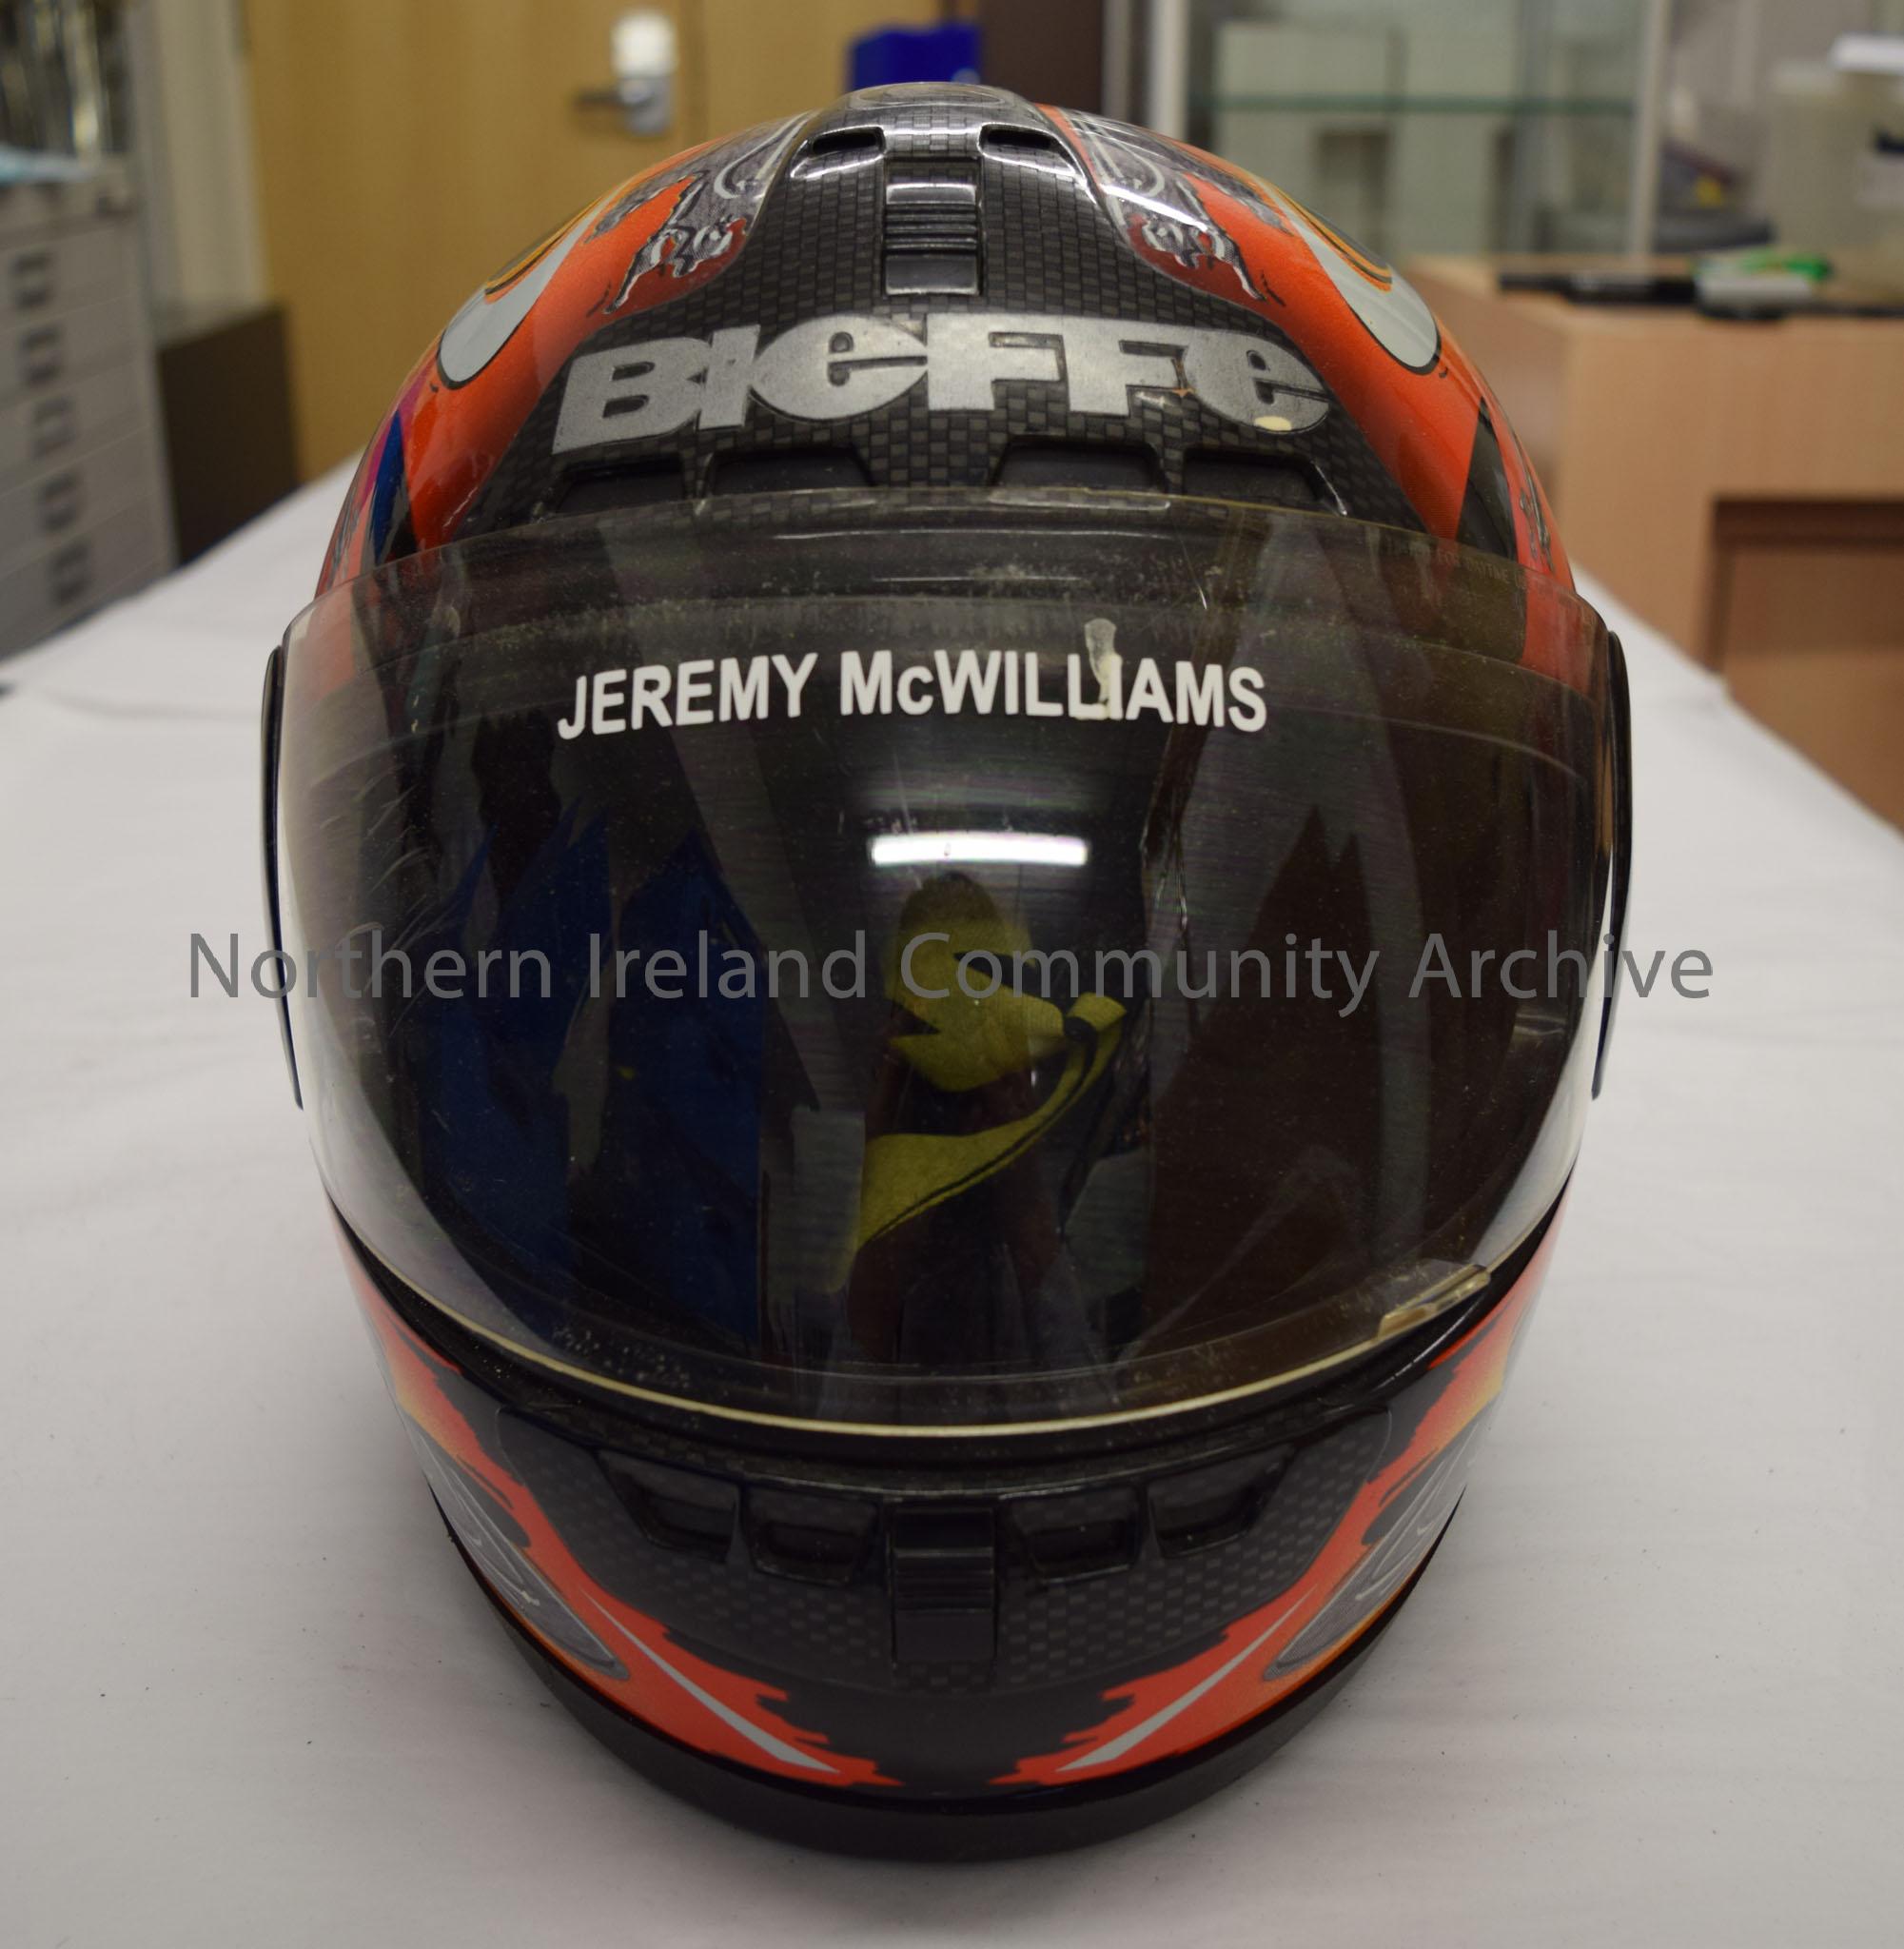 Bieffe motorcycle helmet belonging to Jeremy McWilliams. Black helmet with an orange and grey pattern on it. Small Light and dark grey checked pattern… – 2016.42 (2)